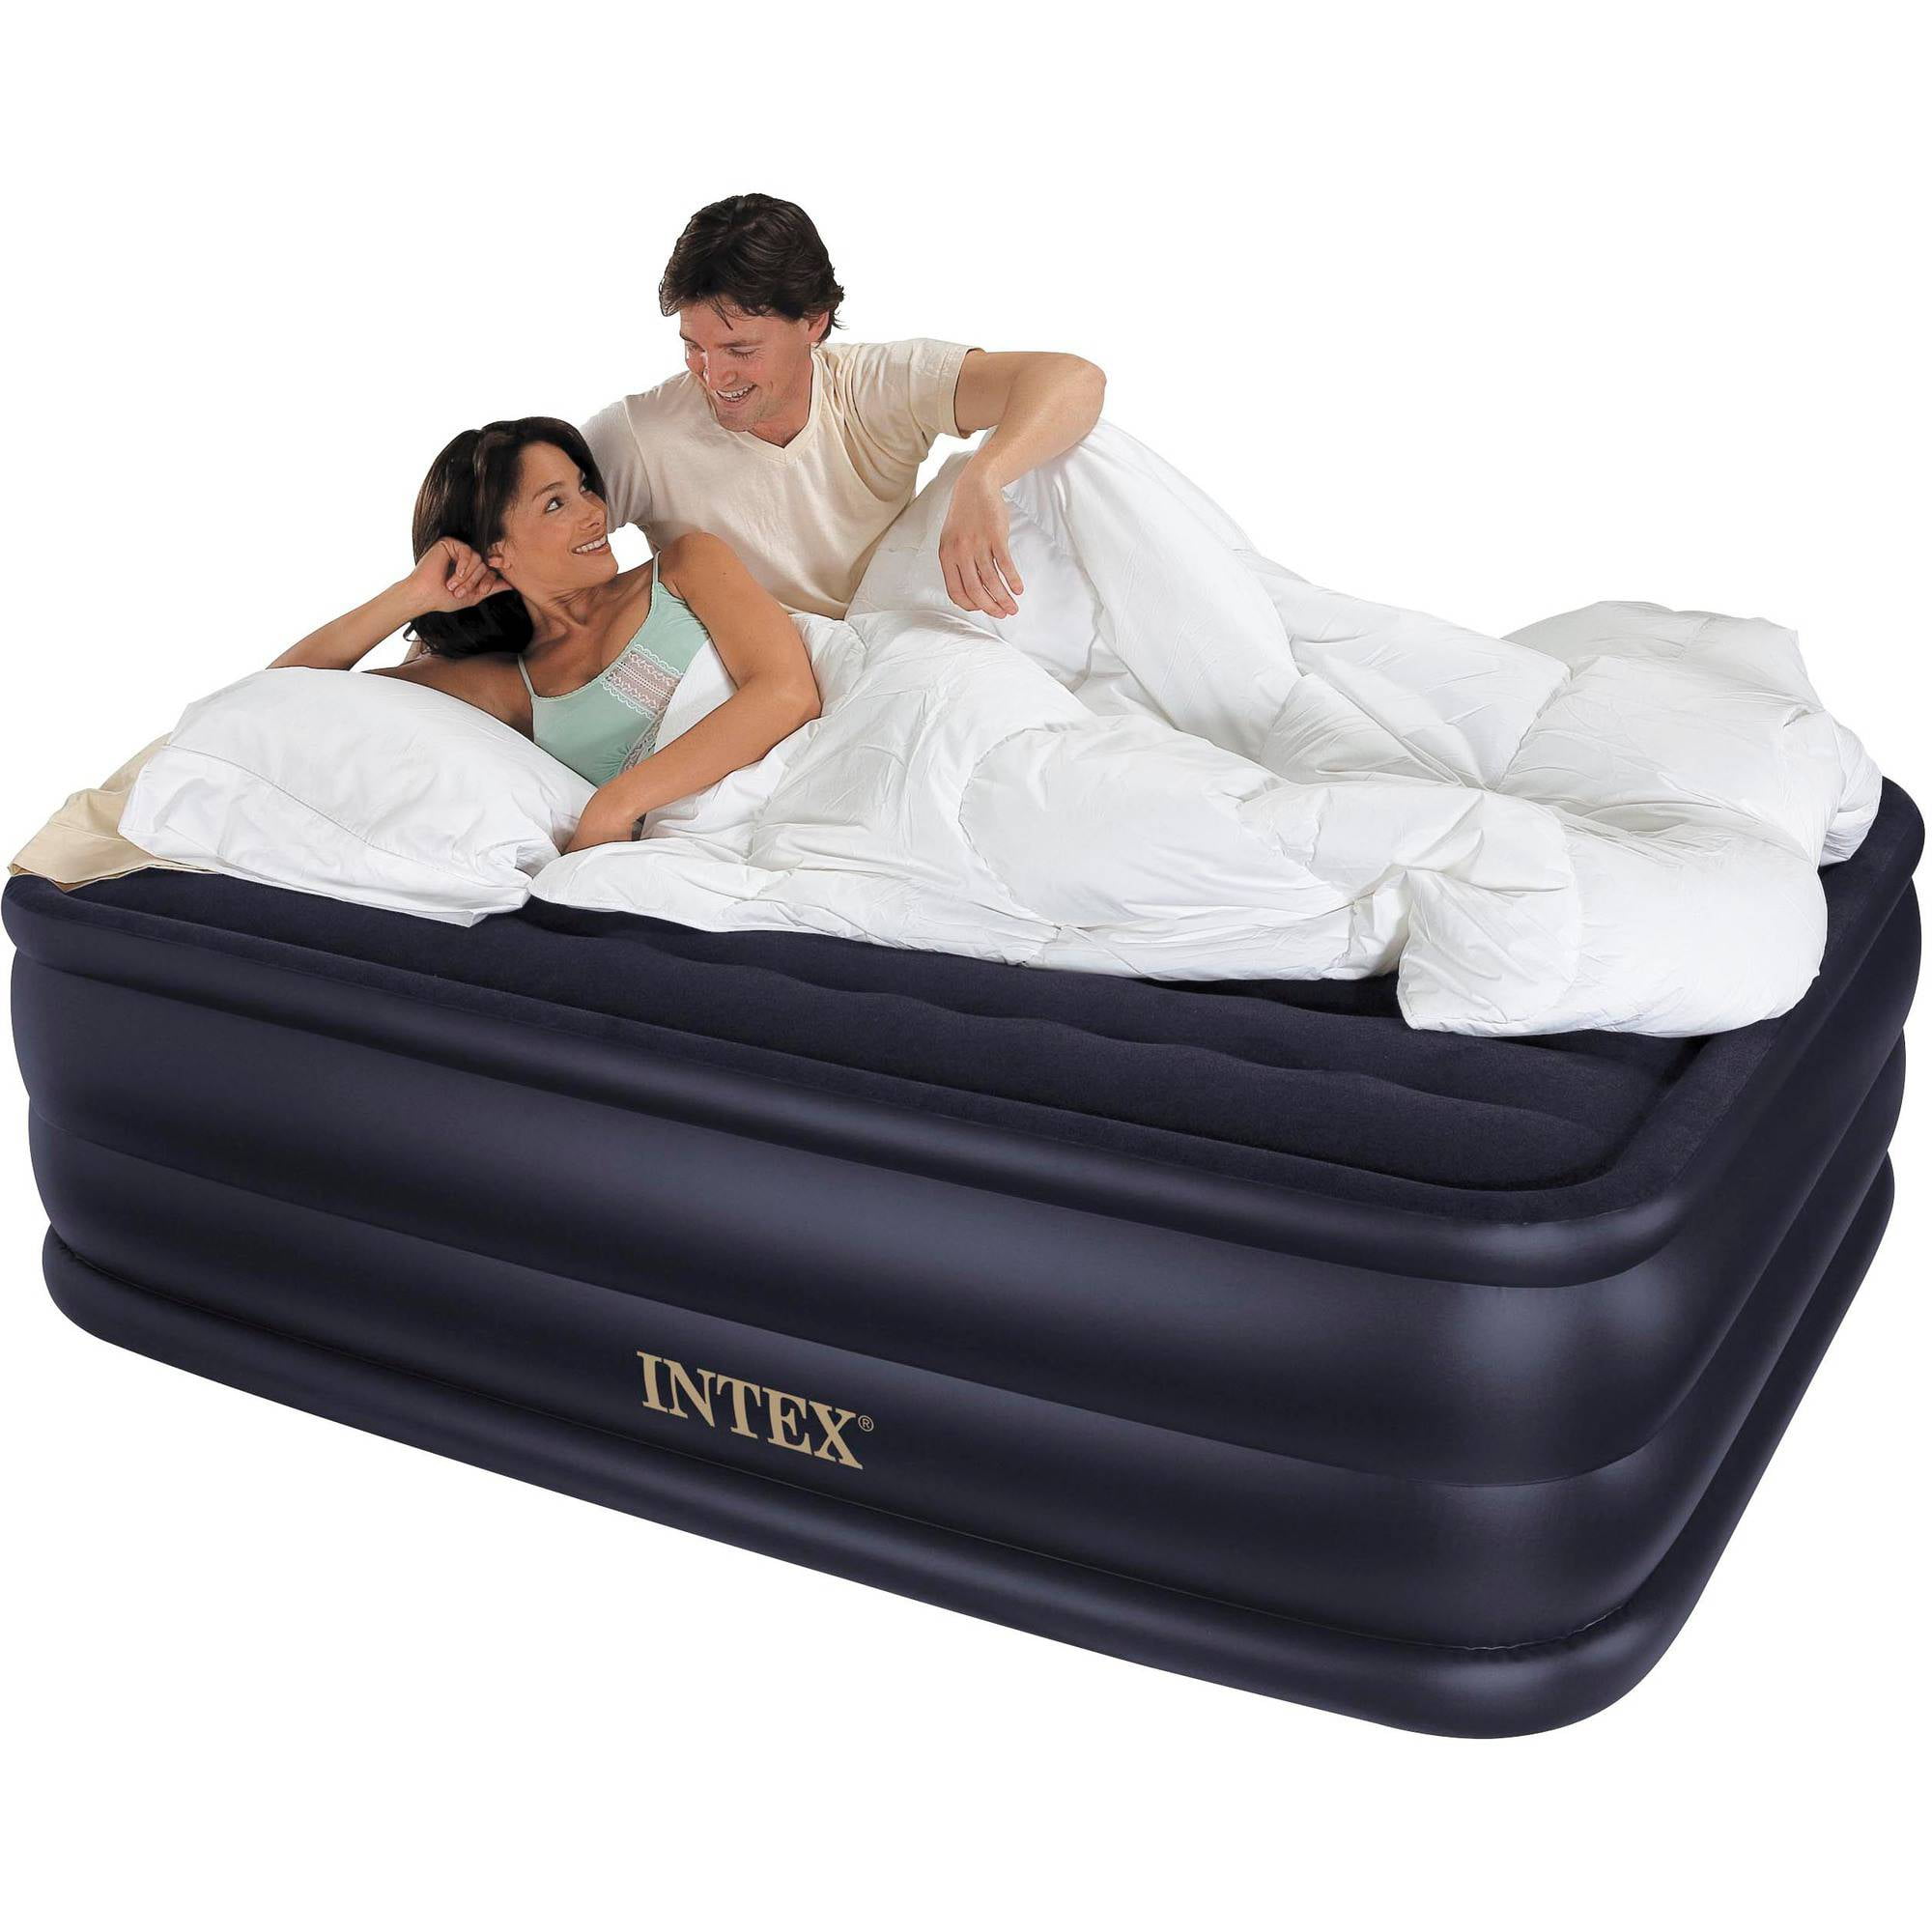 Inflatable Air Bed Queen Size Mattress Pillow Top w/ Electric Pump Airbed Vinyl 